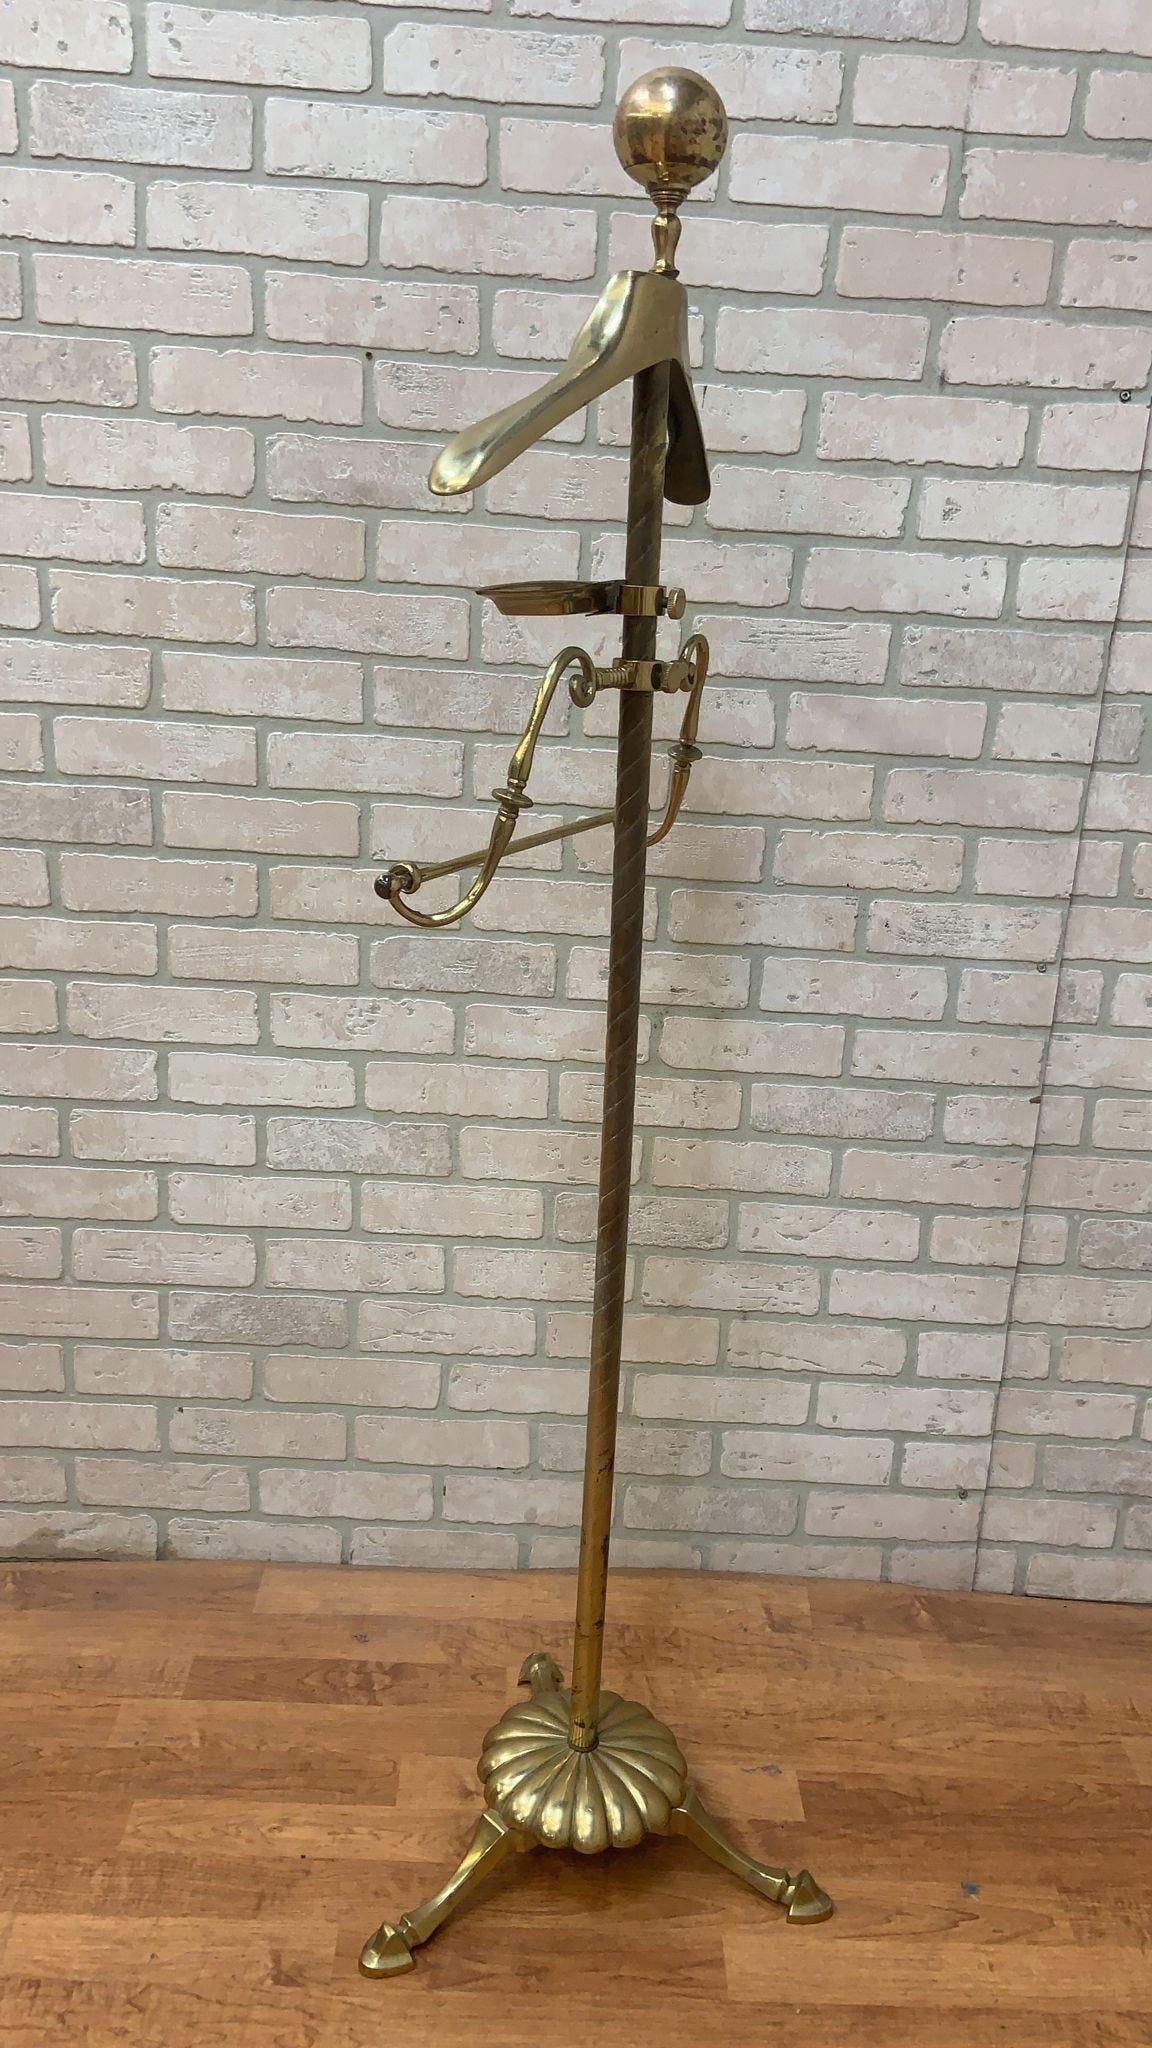 Vintage Art Deco Brass Gentleman's Valet Stand Suit Stand 

Featuring Art Deco Brass Gentlemen's Valet Stand featuring stylish brass with an elegant twisted column and a large brass ball finial for hanging your hat. The beautiful scrollwork on the